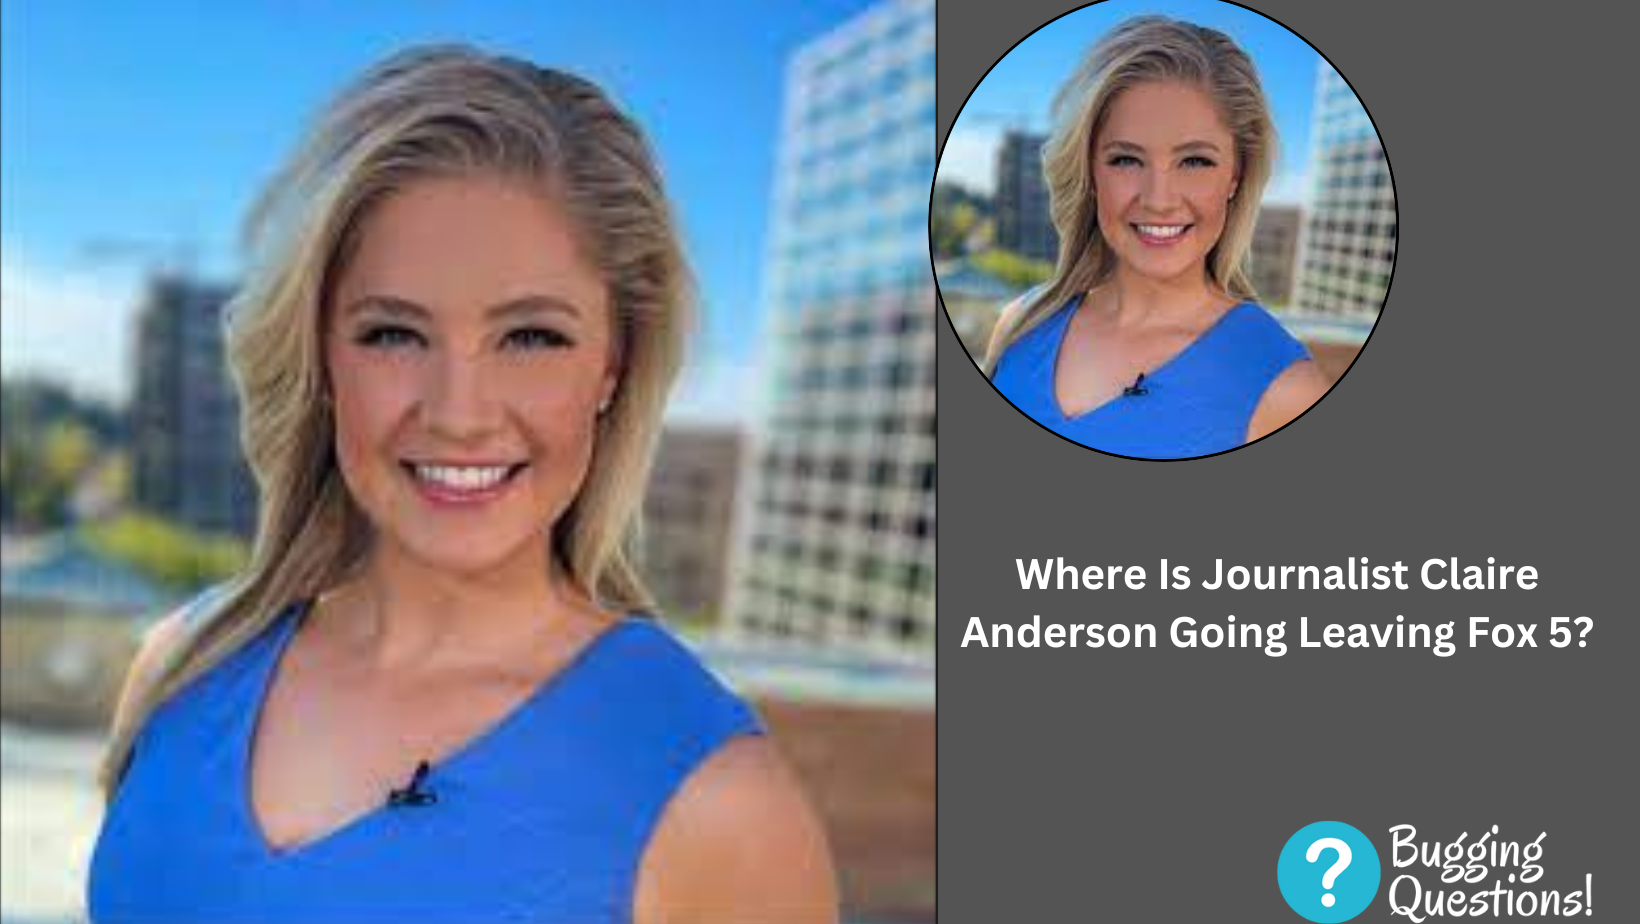 Where Is Journalist Claire Anderson Going Leaving Fox 5?